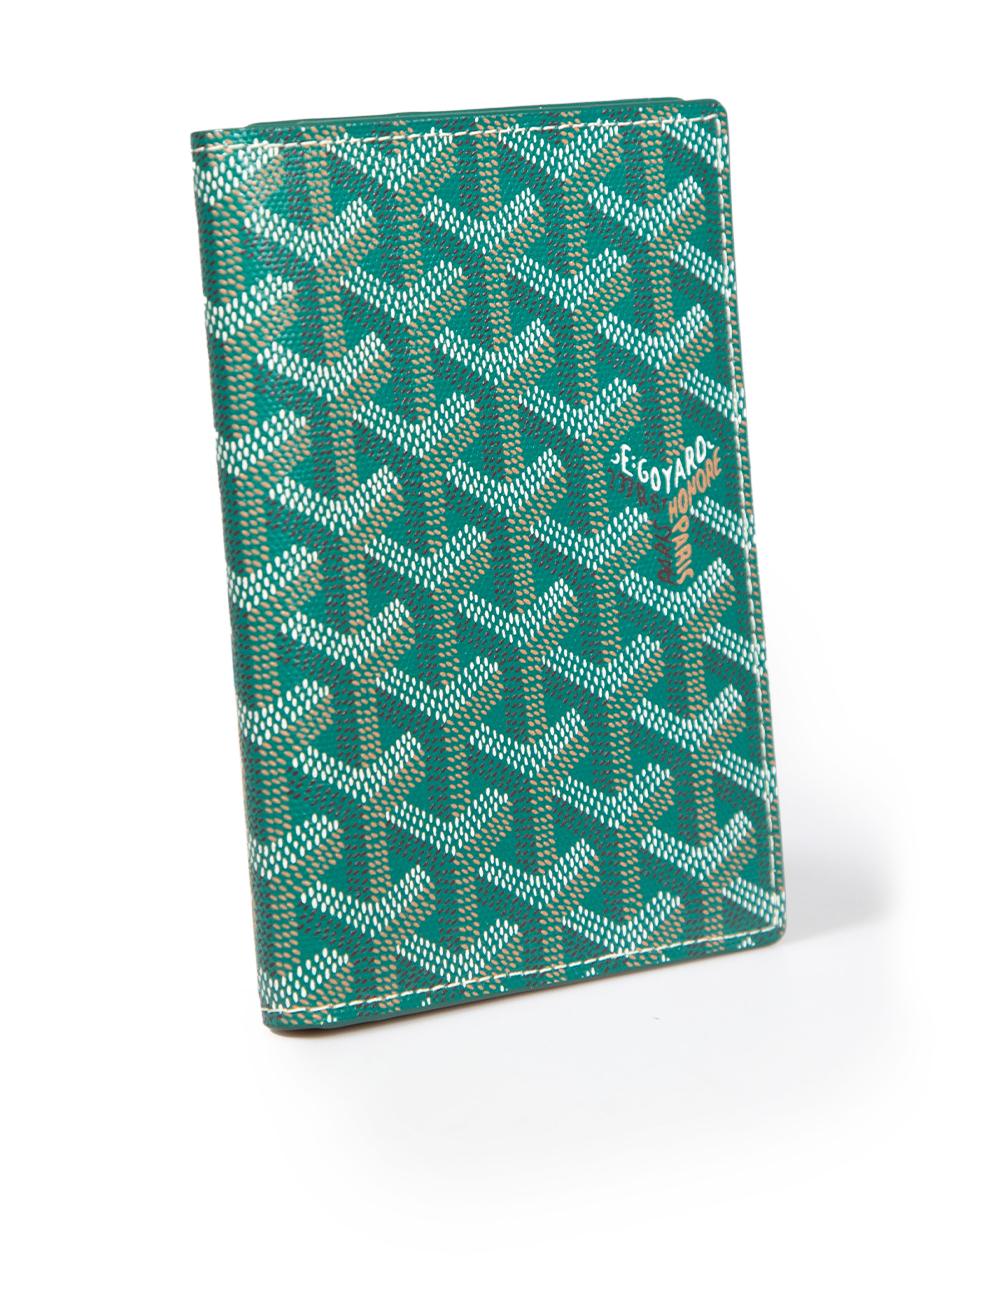 CONDITION is Very good. Hardly any visible wear to the wallet is evident on this used Goyard designer resale item. This item comes with an original box and bag.
 
 
 
 Details
 
 
 Model: Saint Paul
 
 Green
 
 Goyardine coated canvas
 
 Passport